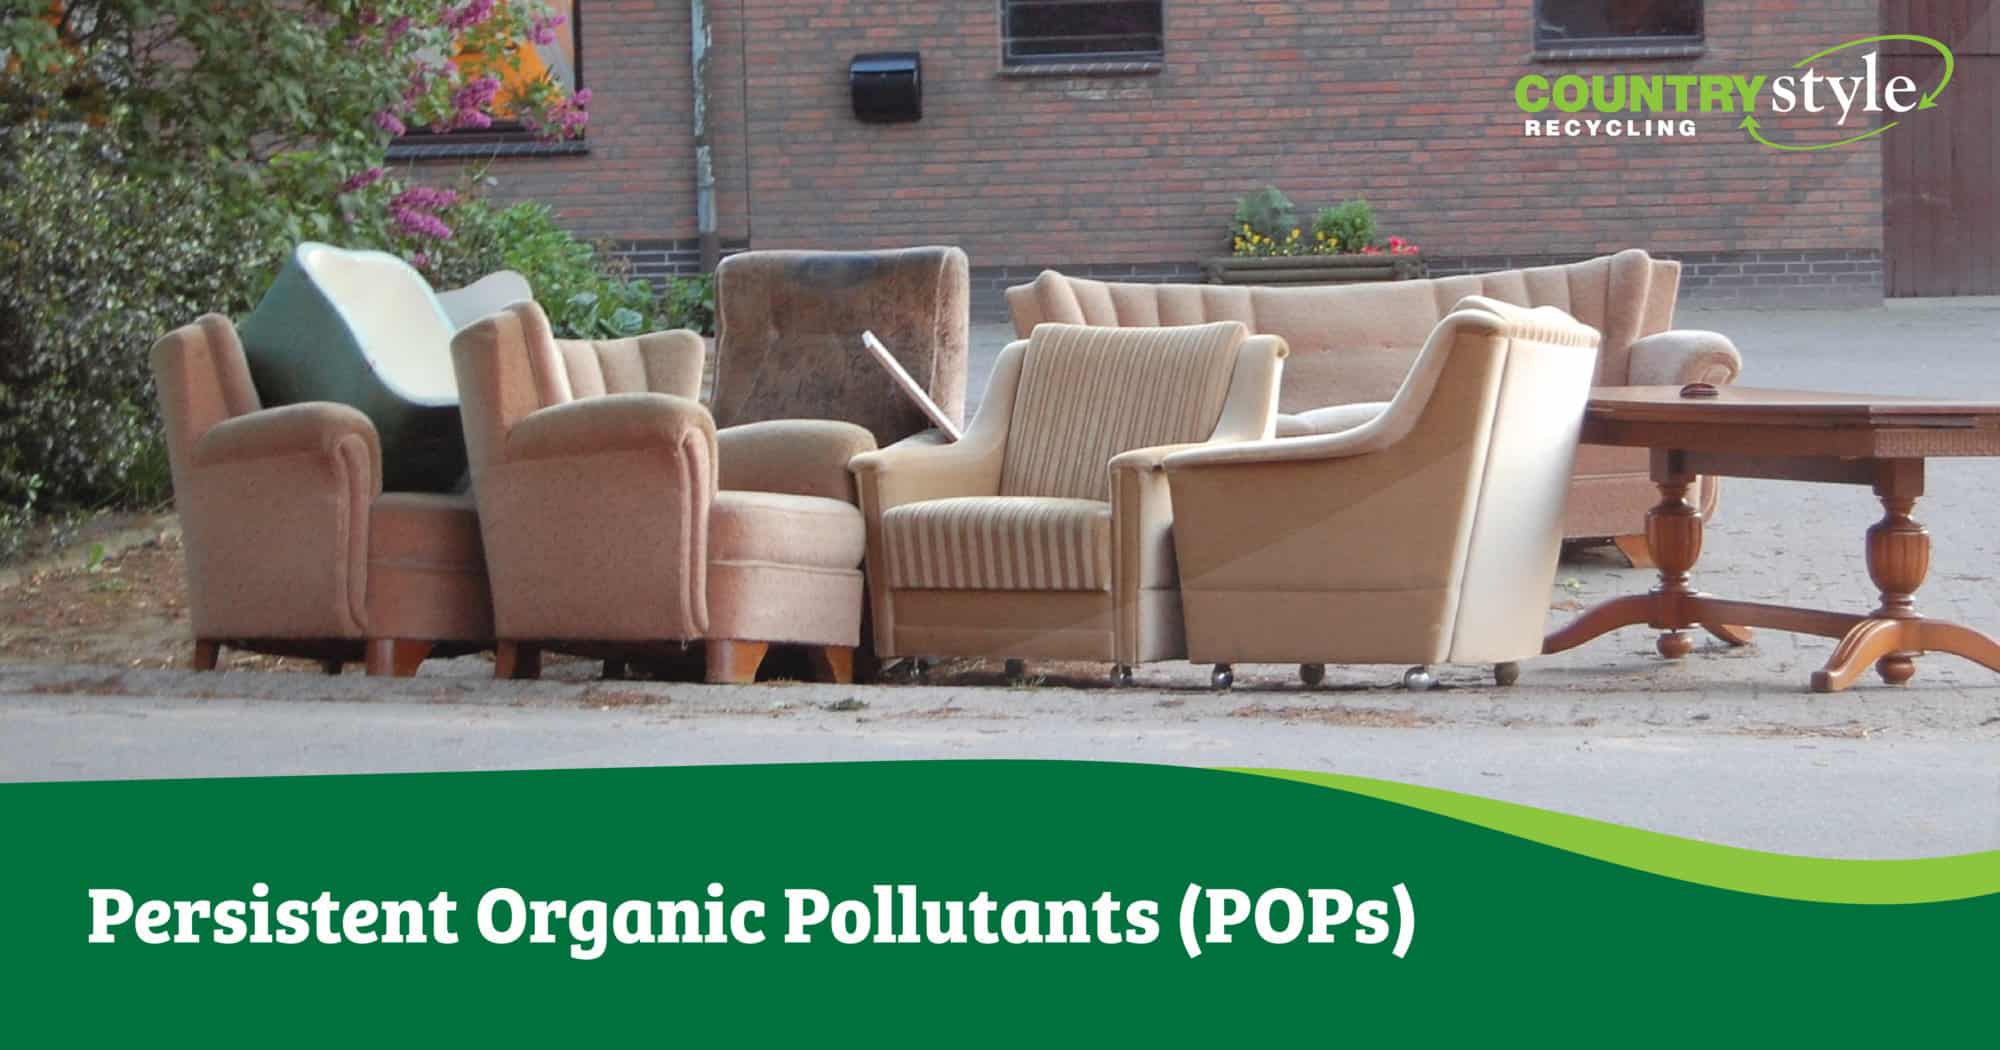 What are POPs? (Persistent Organic Pollutants)